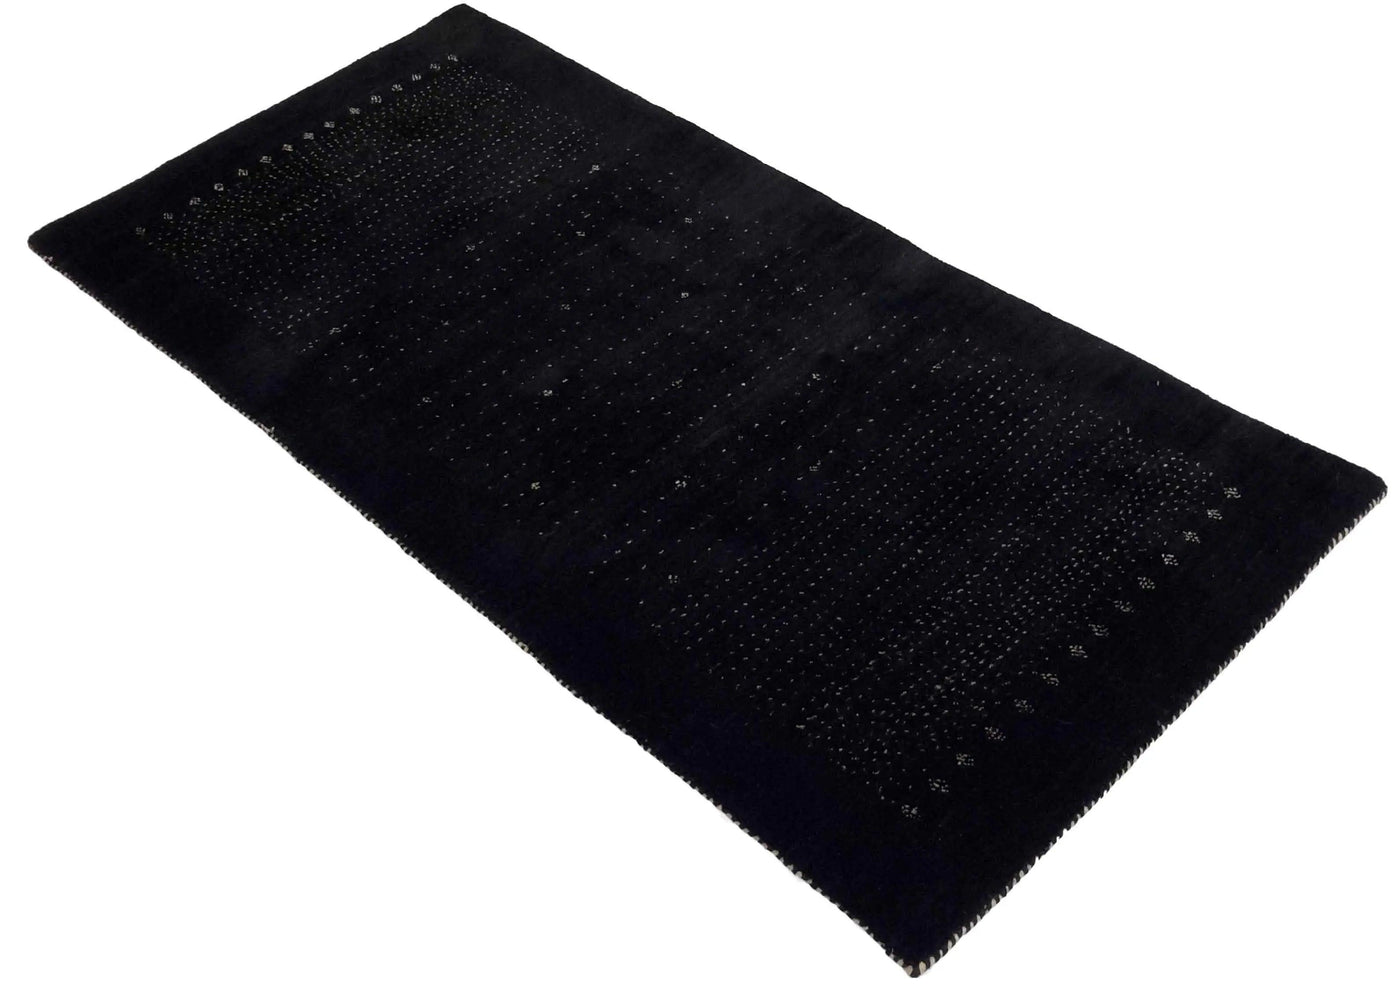 Canvello Hand Made Black Modern All Over Indo Gabbeh Rug - 2'4'' X 4'9''